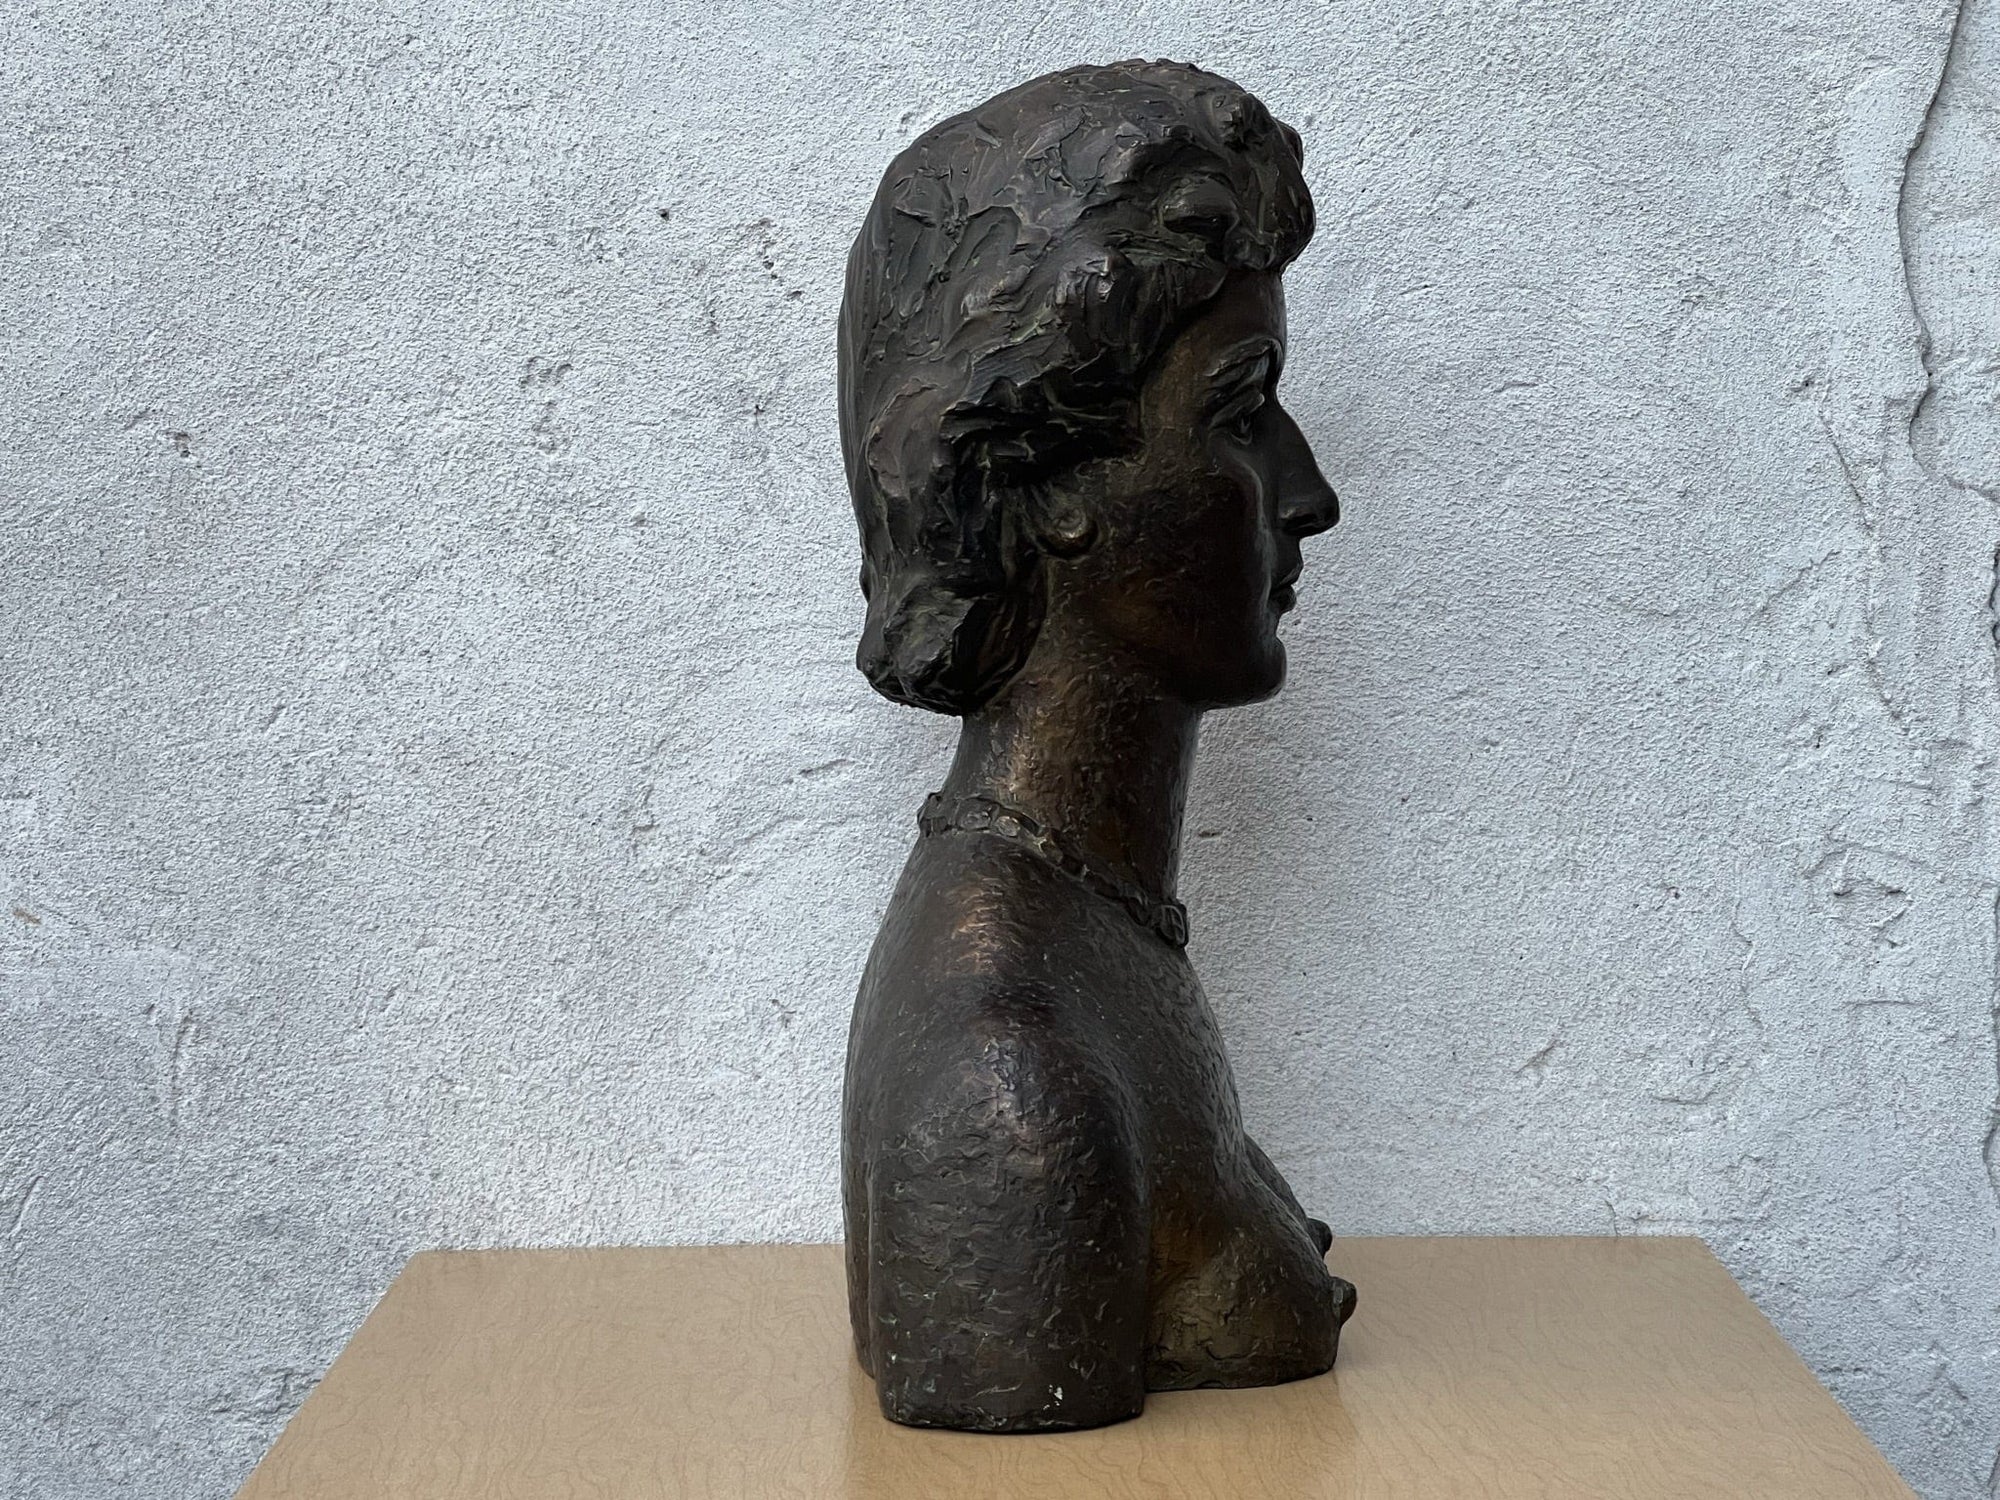 Large Bust of a Regency Lady, 1930 for sale at Pamono